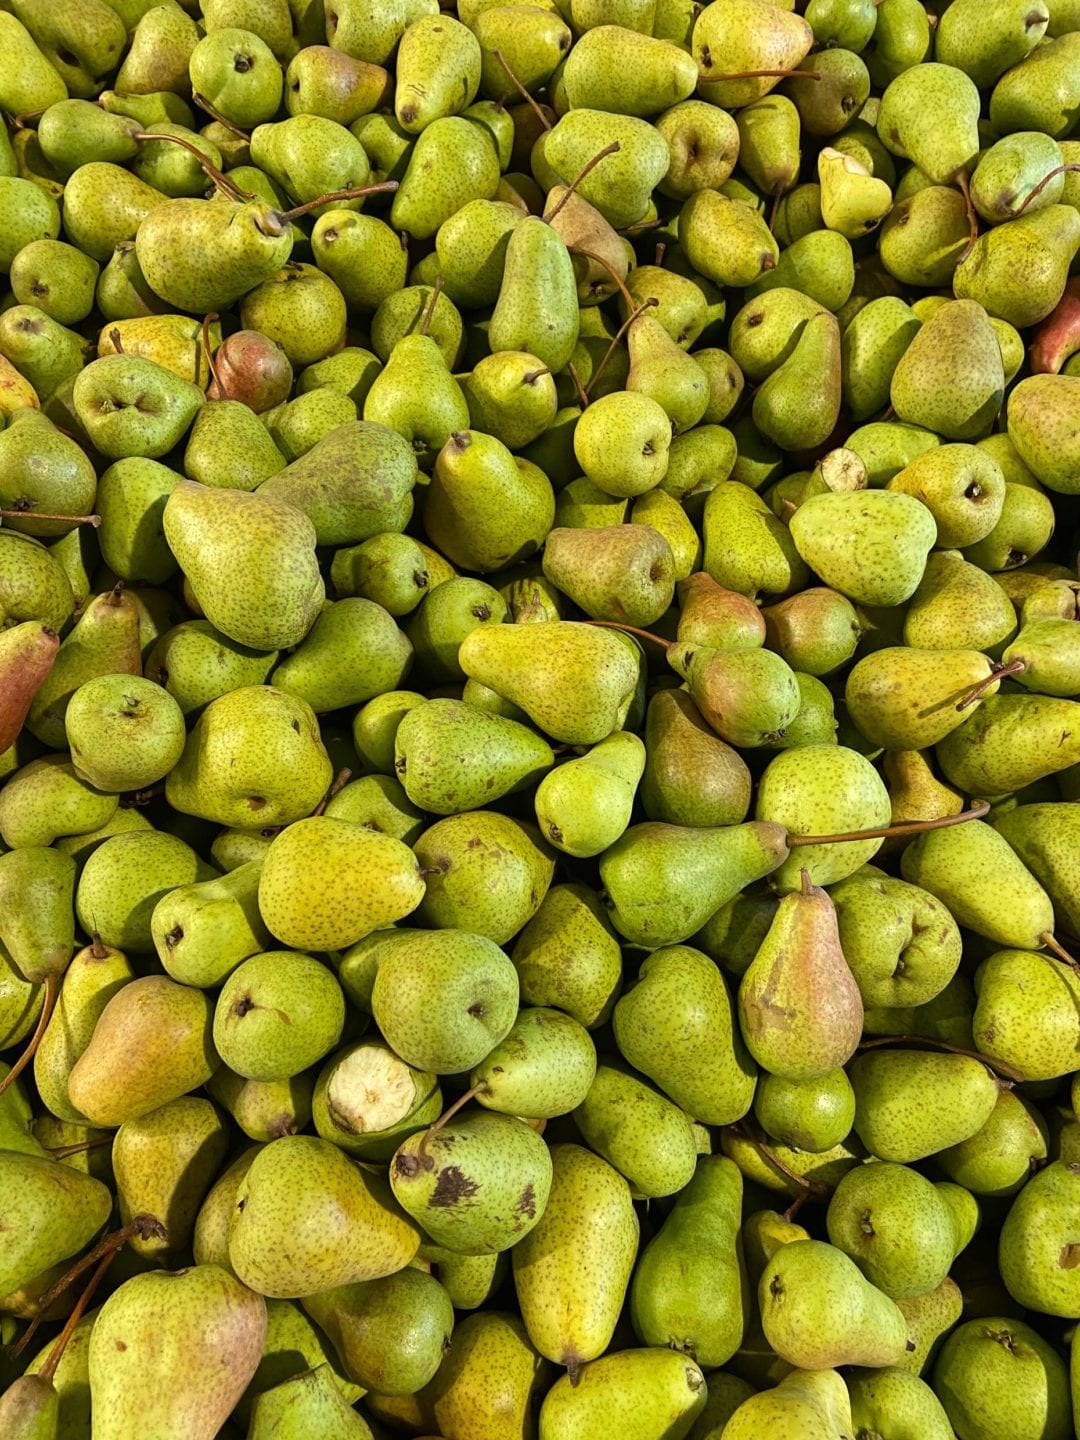 Pears ready to be juiced